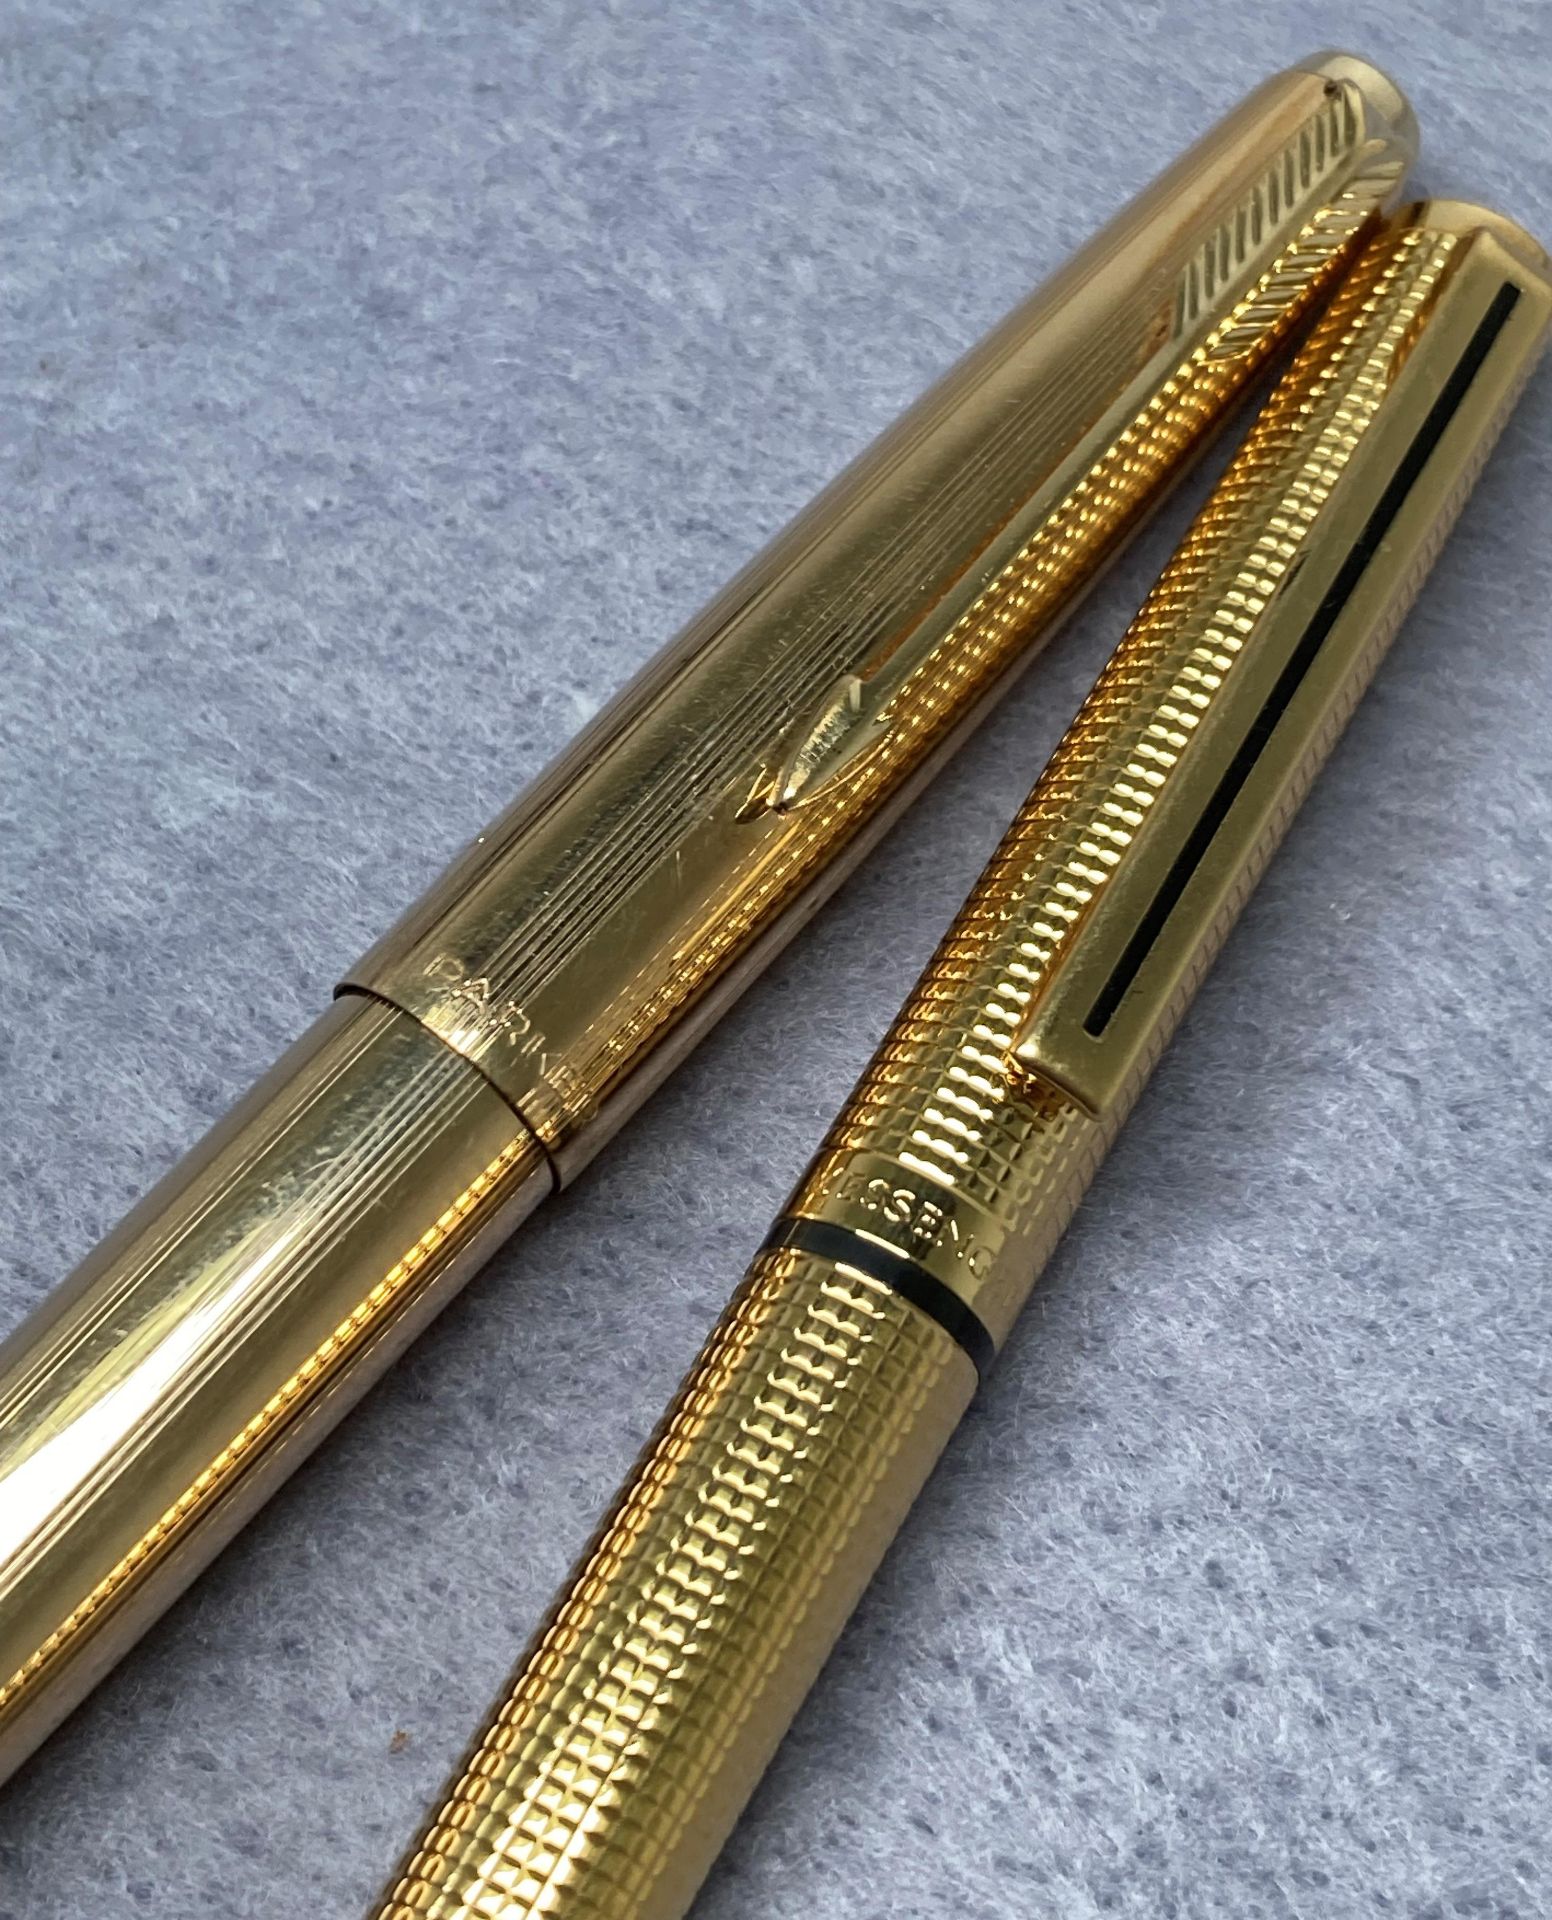 Montblanc-Meisterstuck gold-coated Classique Mechanical Pencil no: EY1492310 Germany, - Image 4 of 4